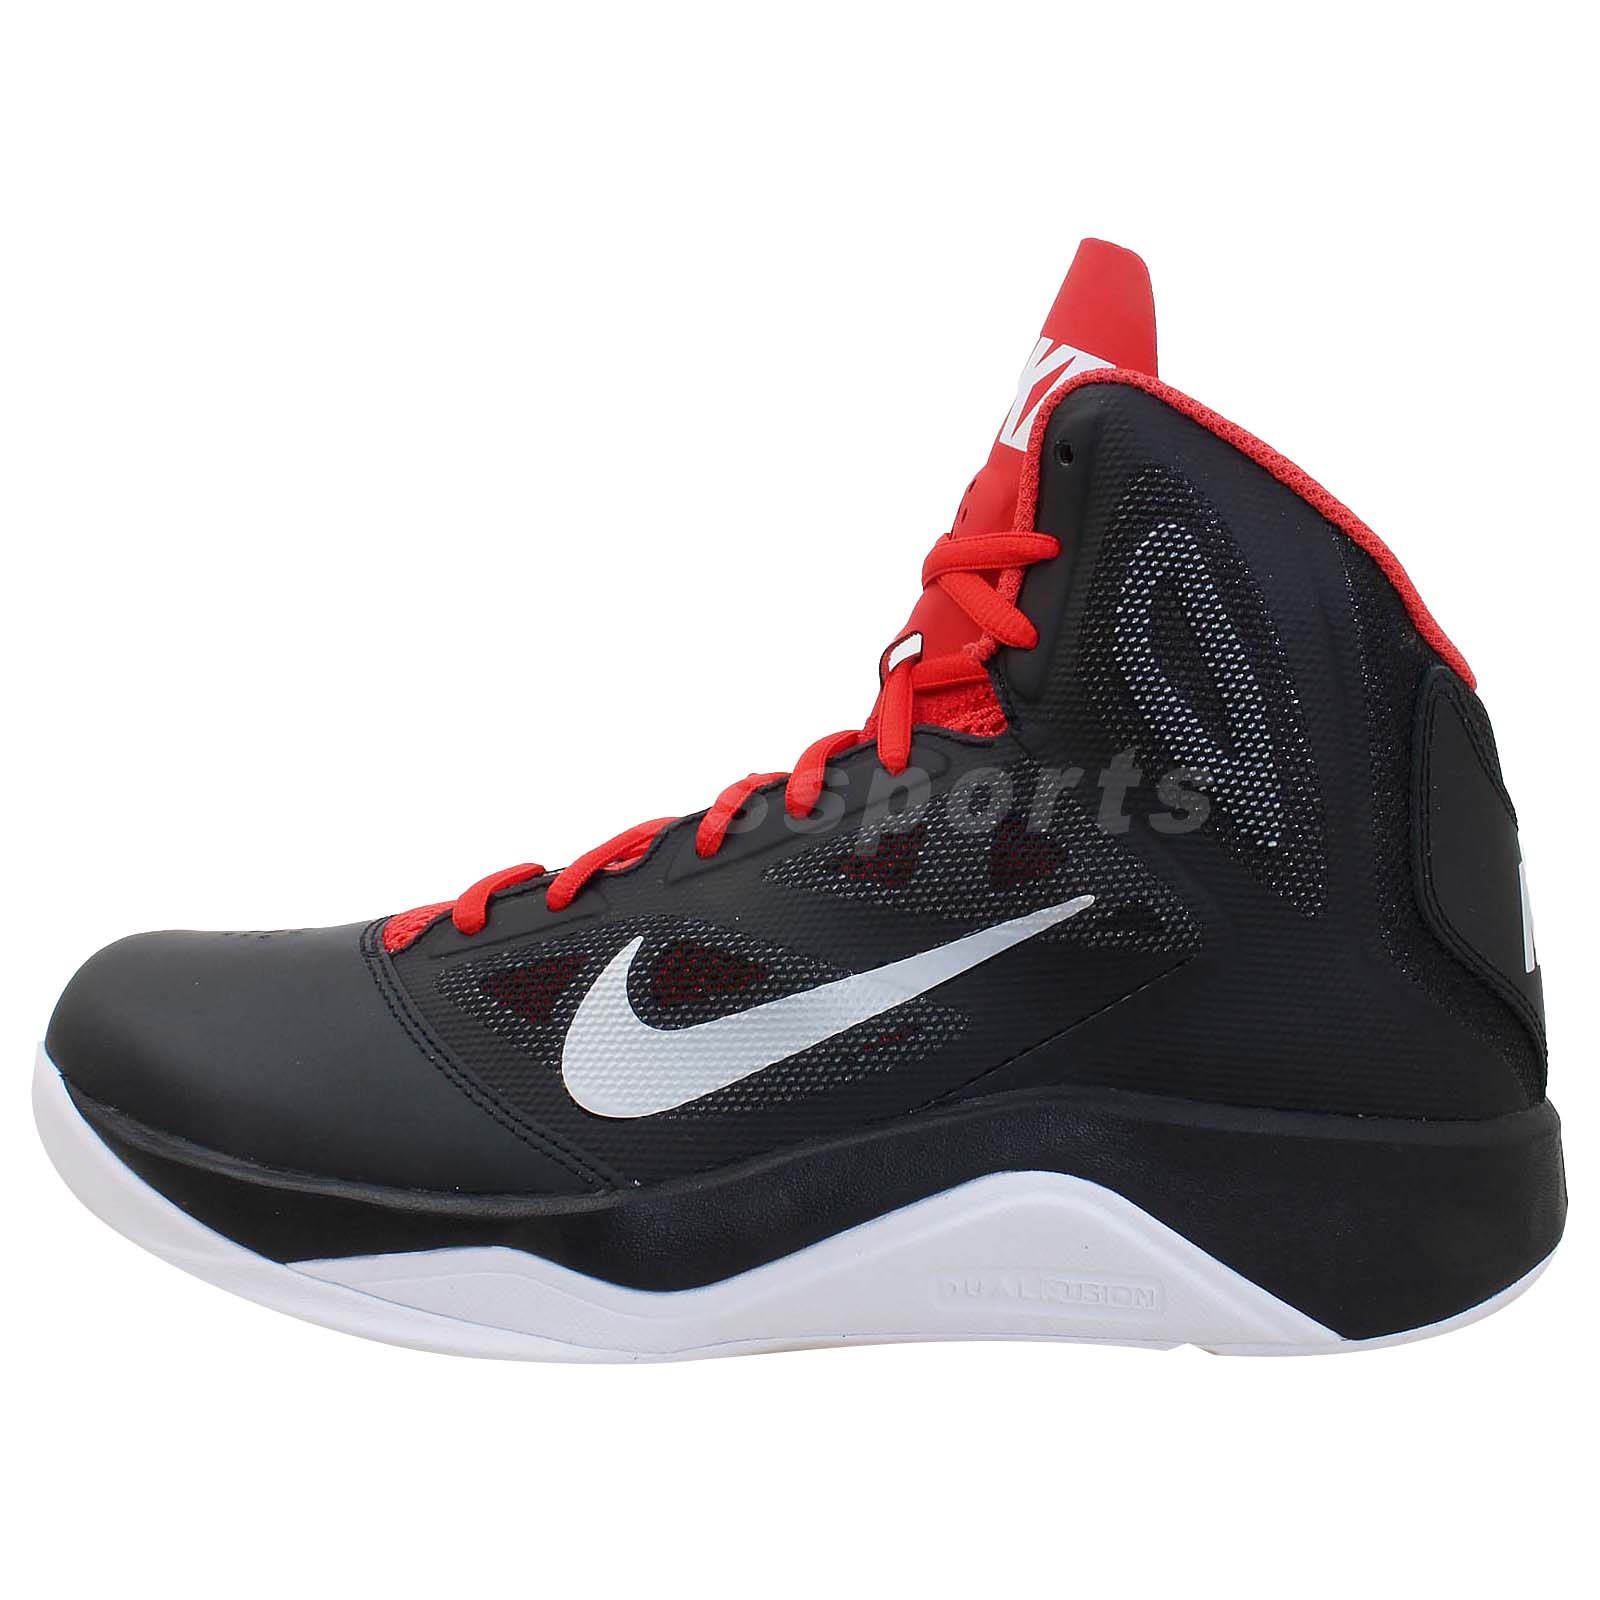 Pix For New Nike Basketball Shoes 2014. fashion and style